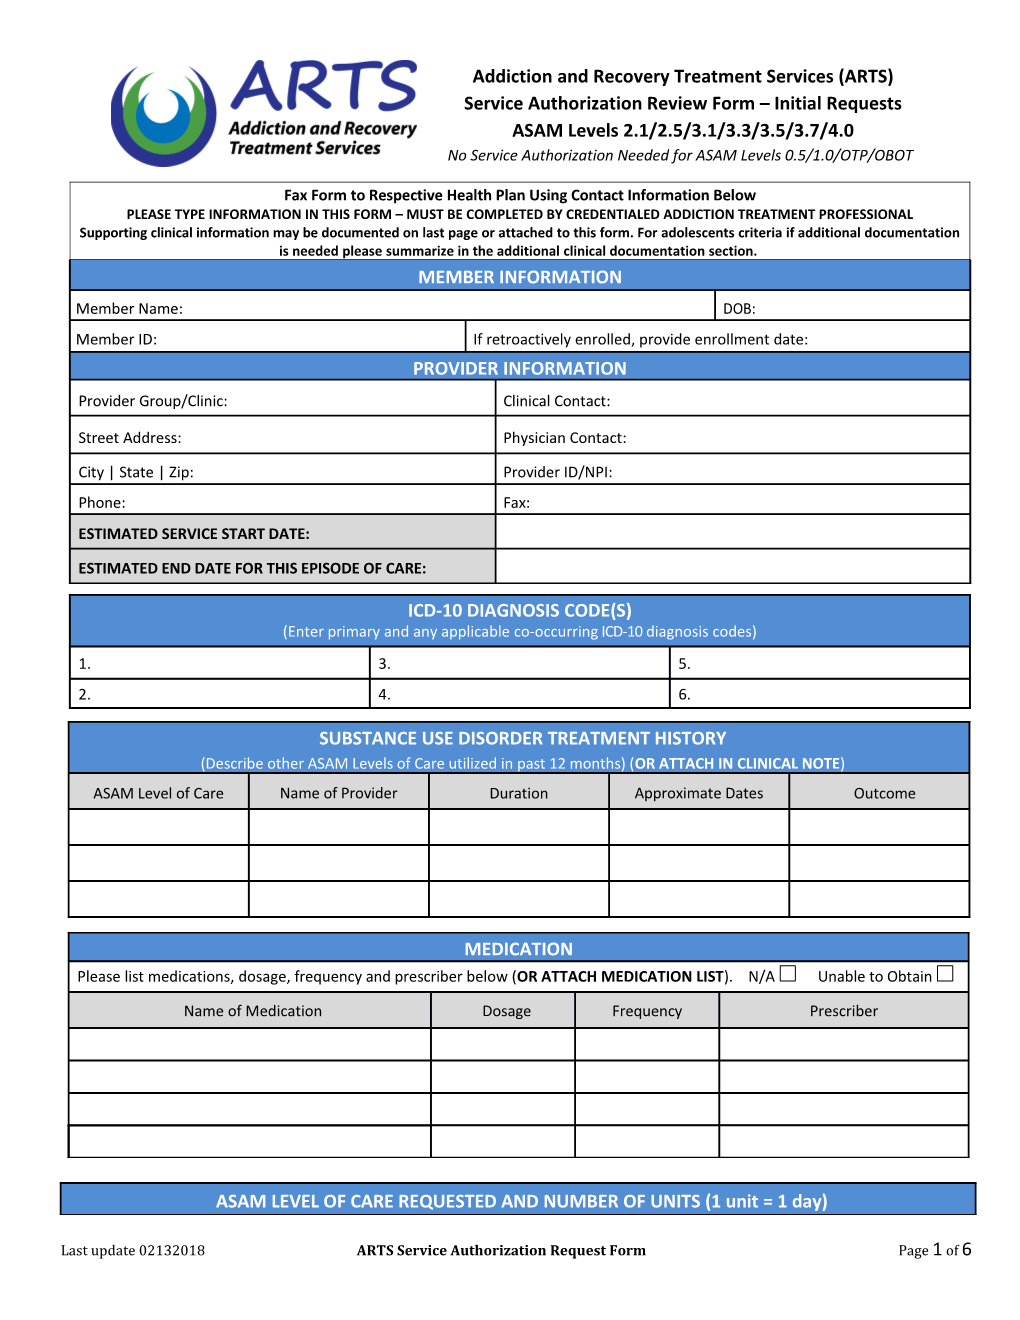 Service Authorization Review Form Initial Requests